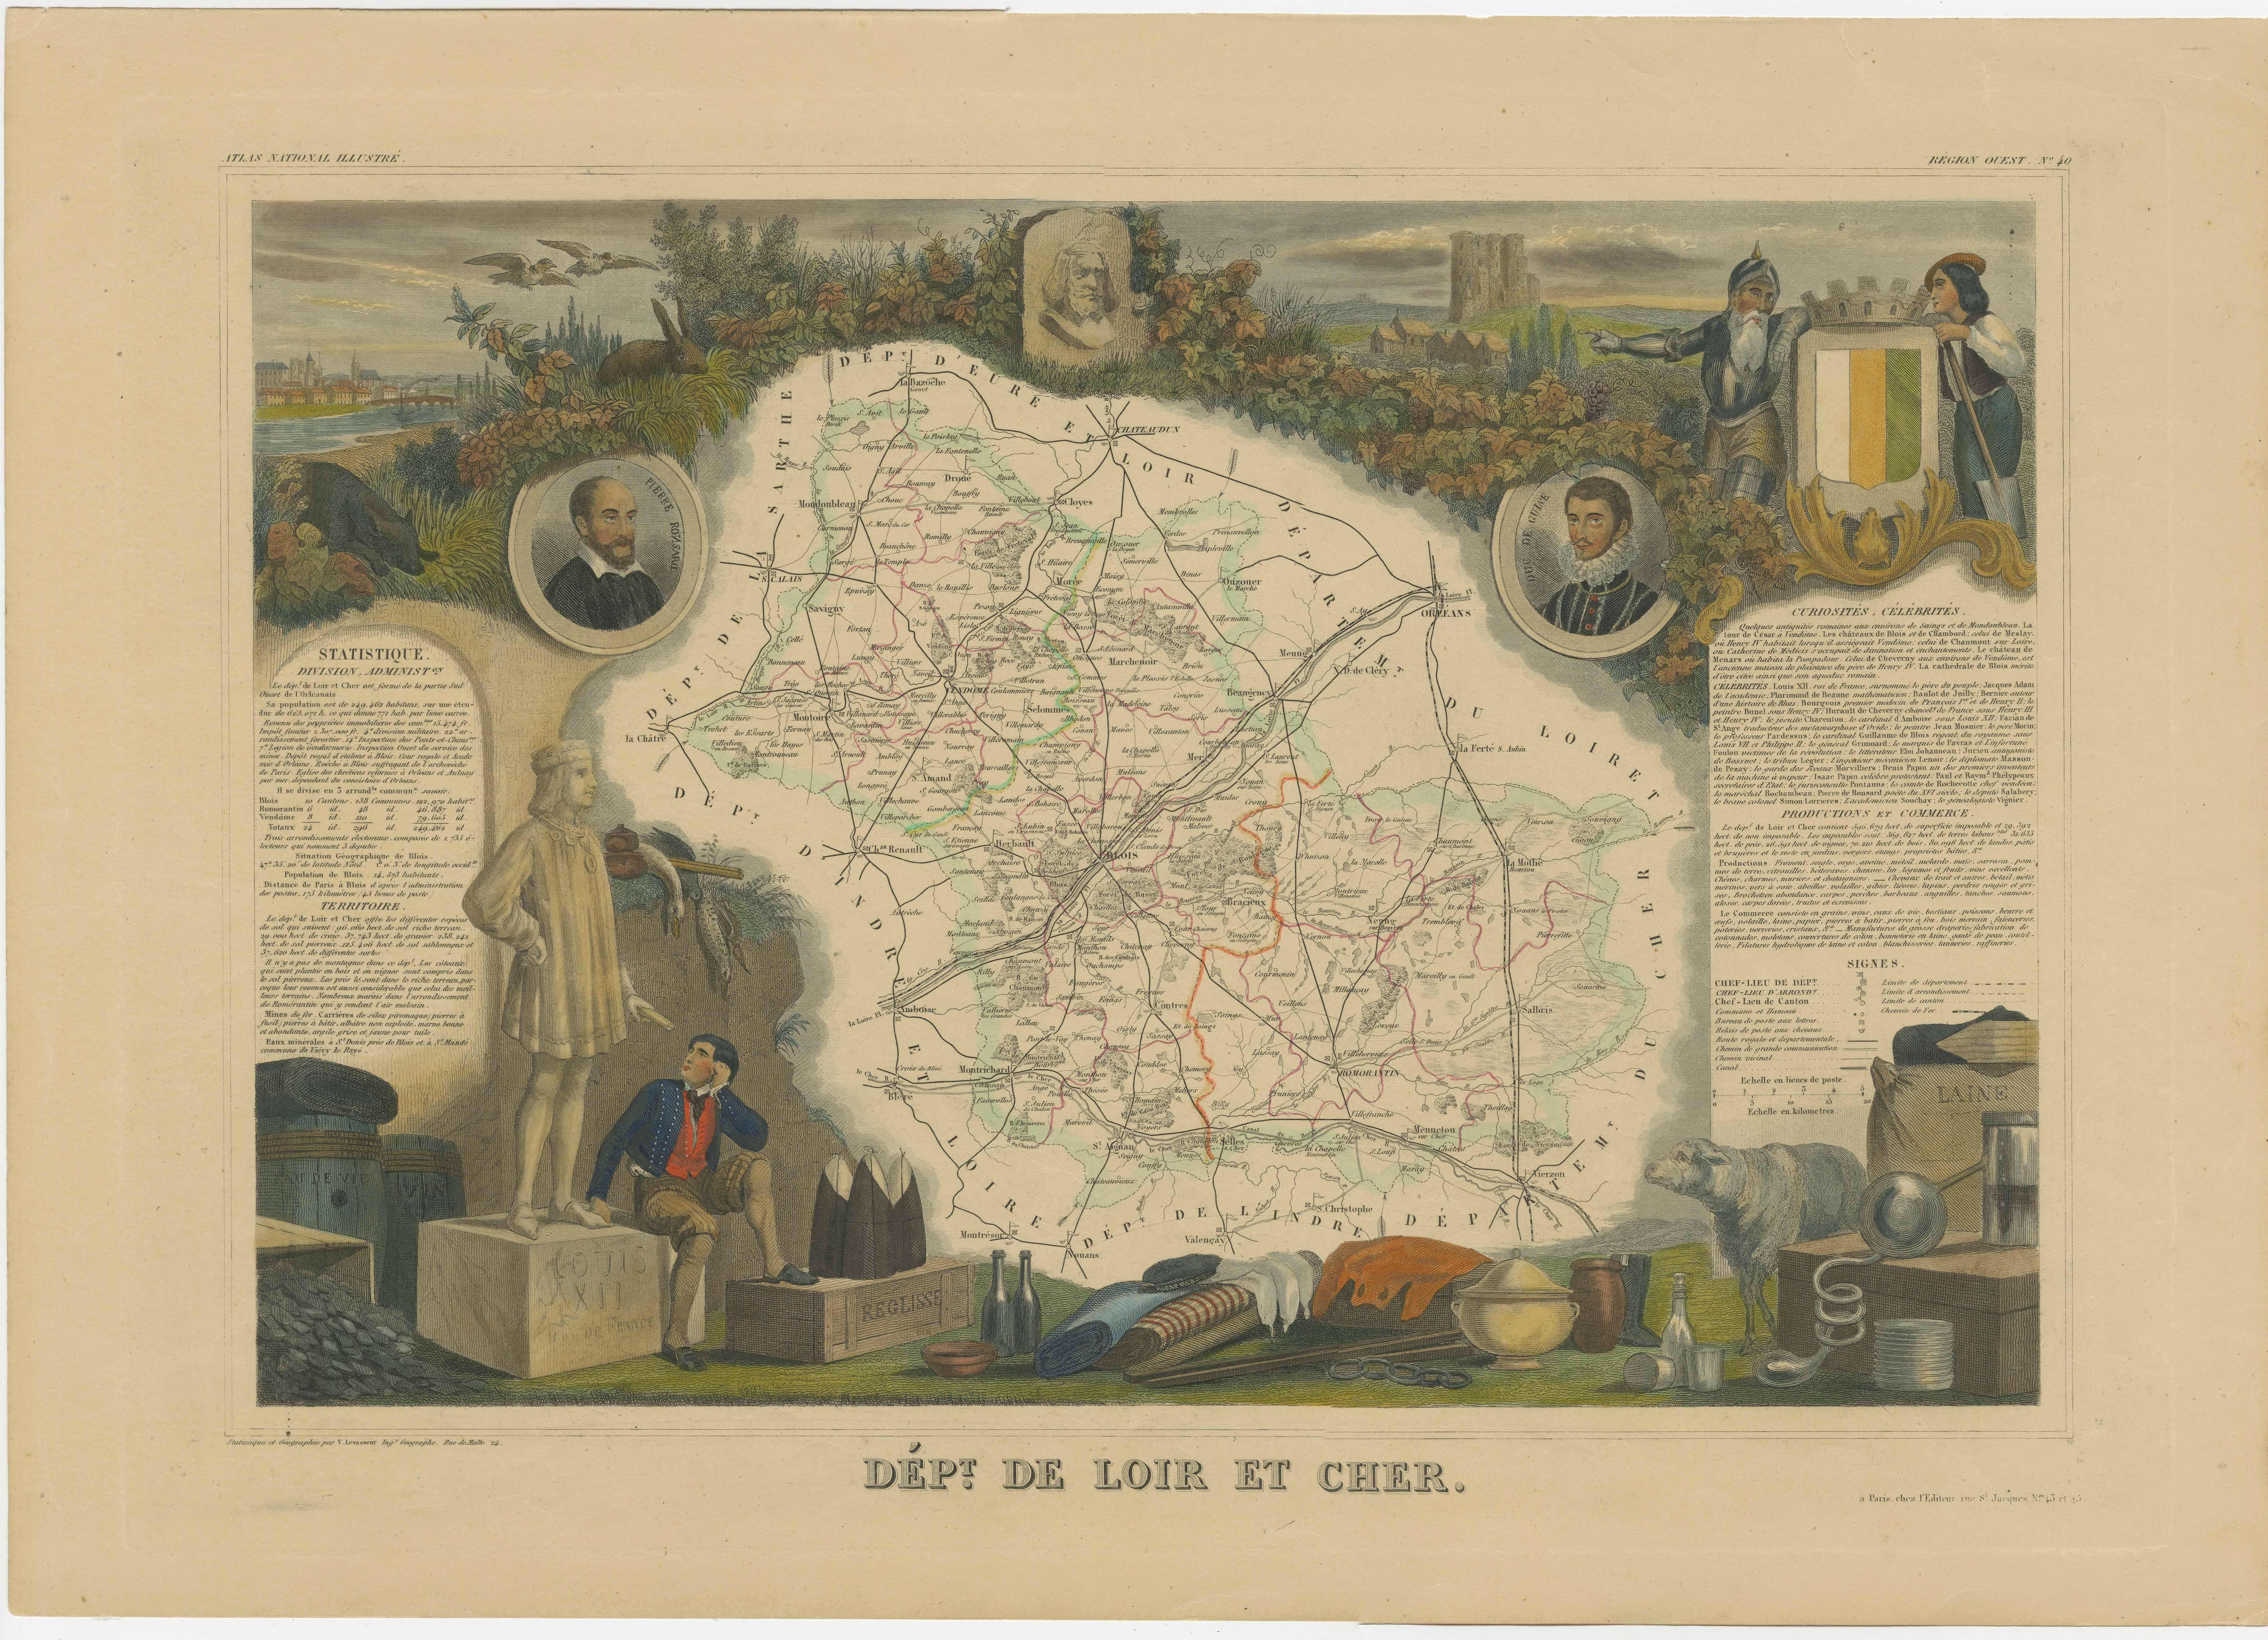 Antique map titled 'Dépt. de Loir et Cher'. Map of the French department Loir-et-Cher, France. This area is mainly known for its production of Selles-sur-Cher, a fine goats-milk cheese. The whole is surrounded by elaborate decorative engravings